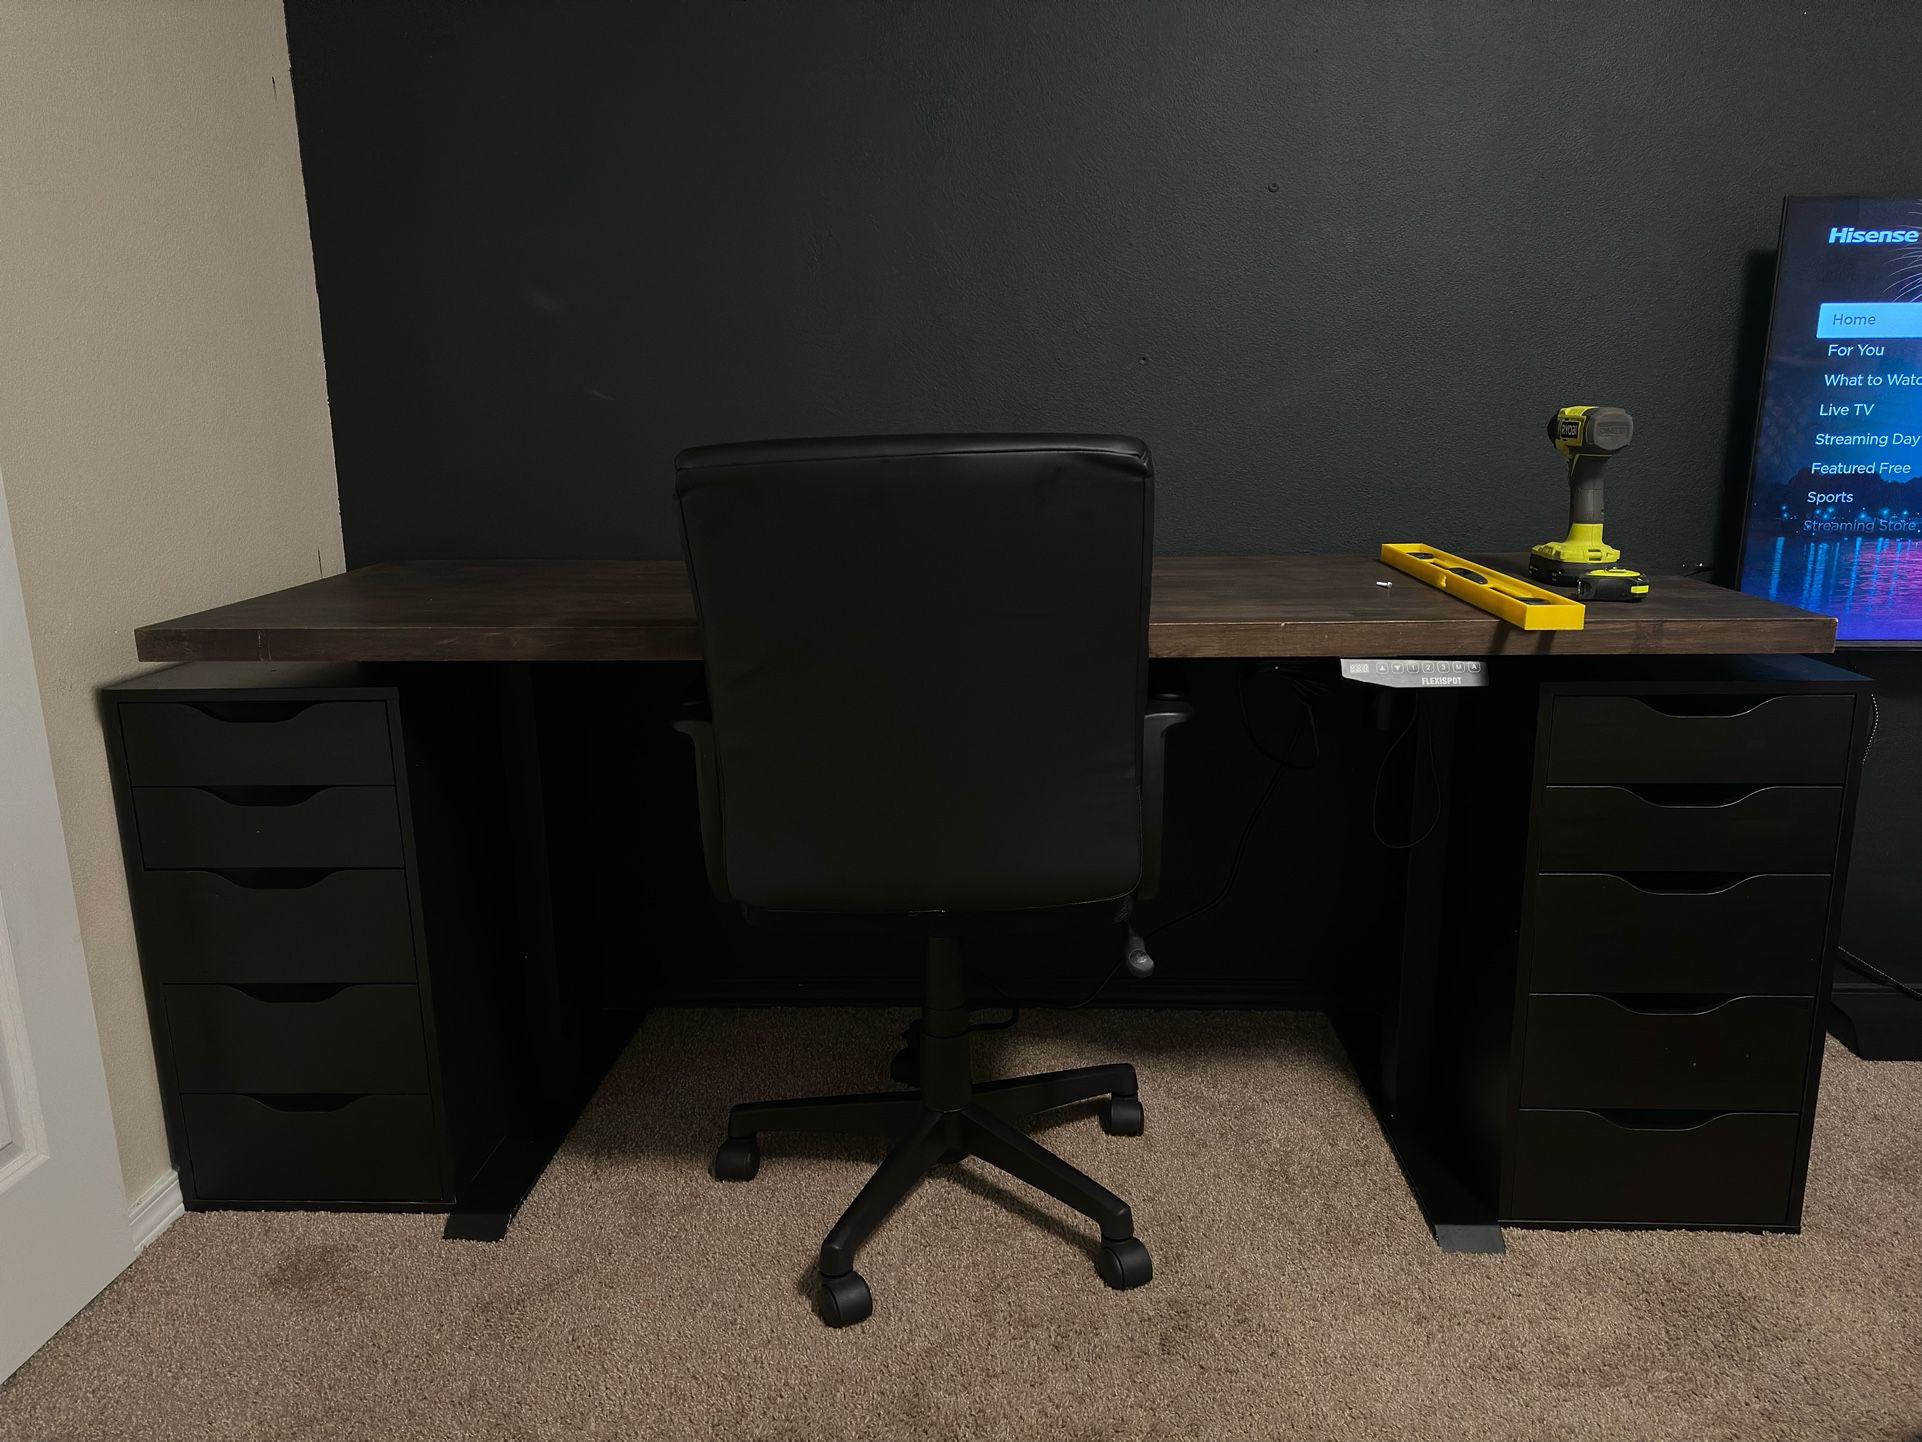 Adjustable Height Desk, Drawers And Office Chair